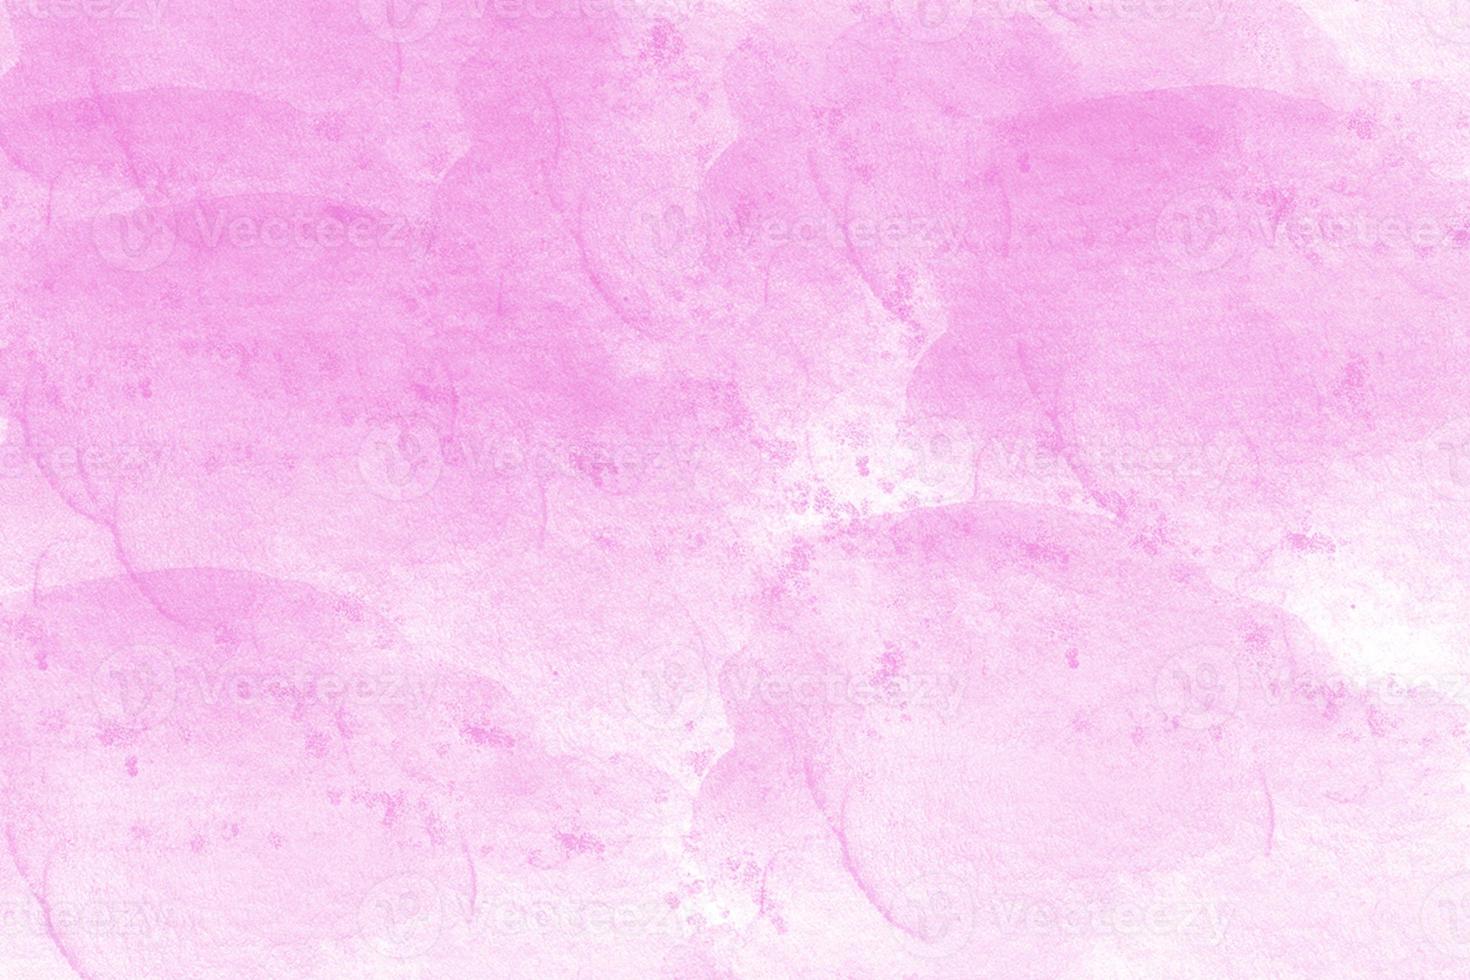 Pink watercolor with a textured background photo